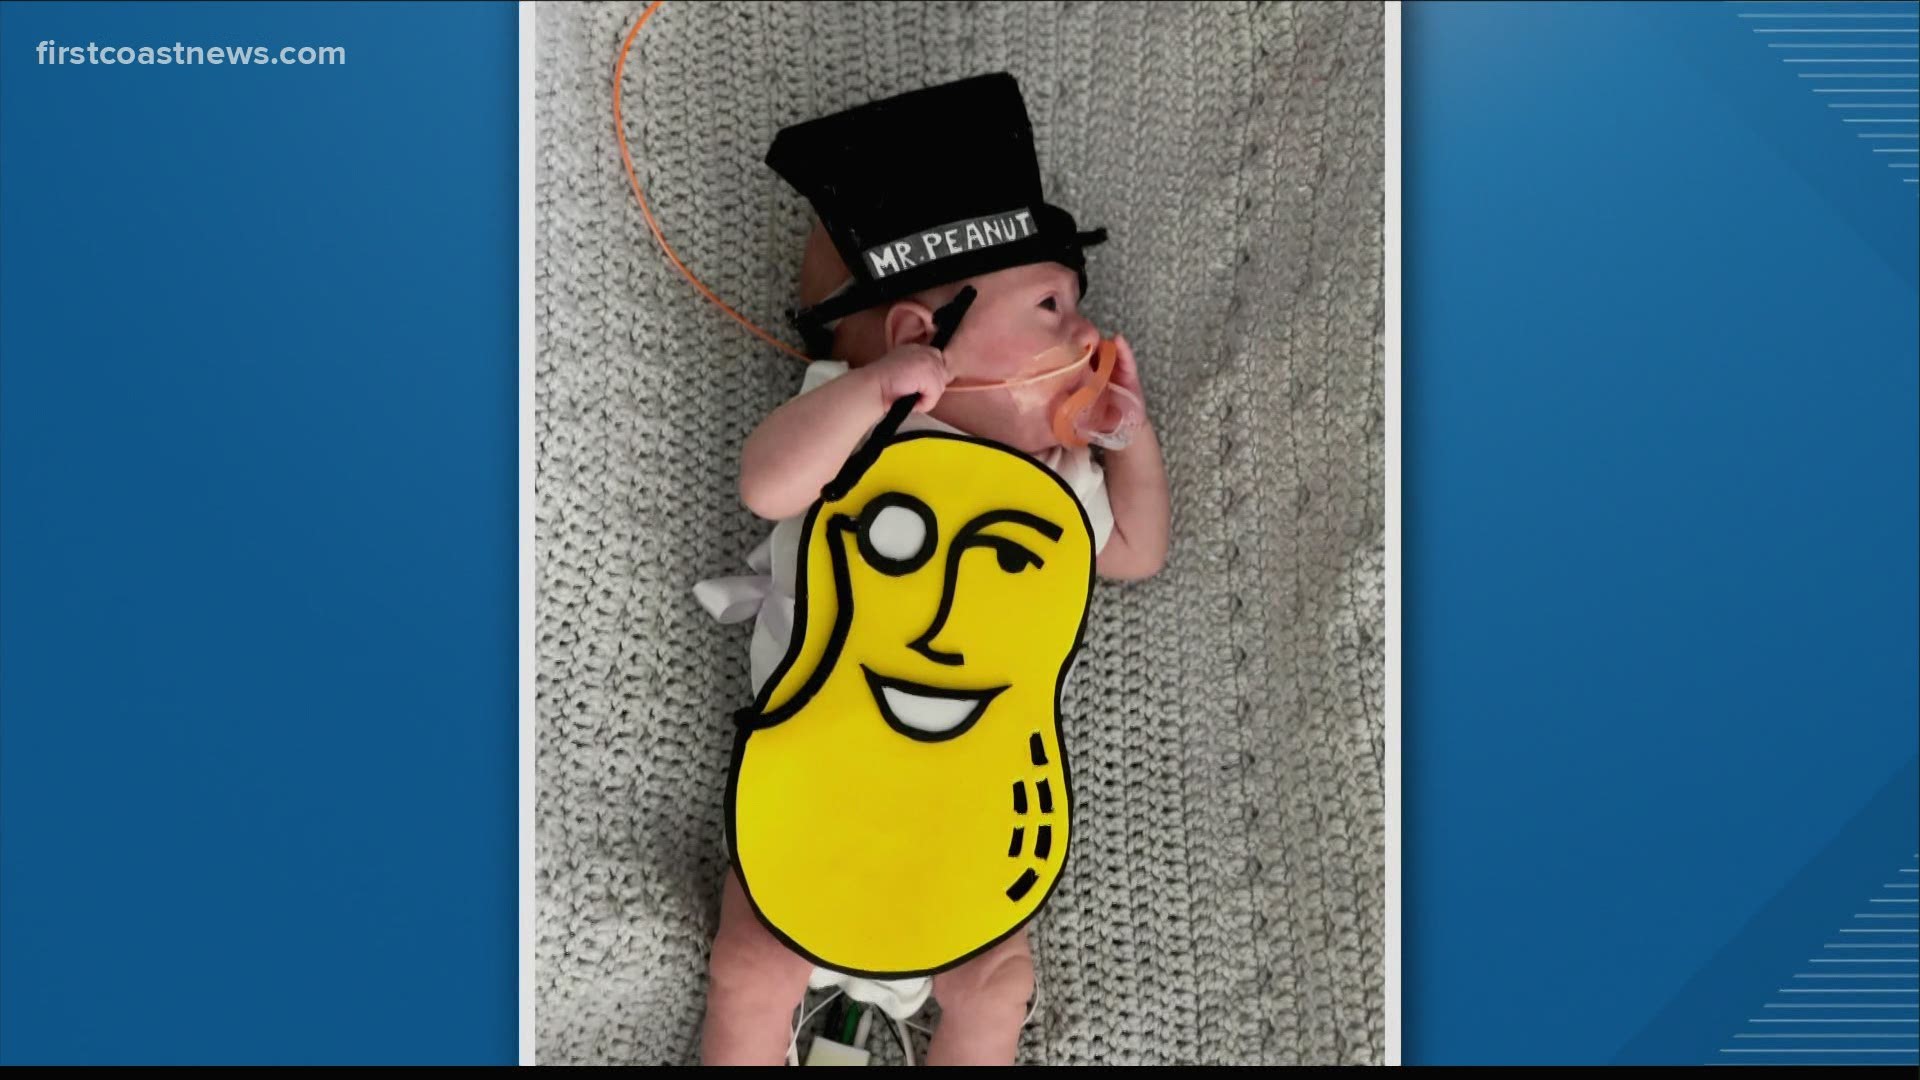 The hospital shared a sneak peek of the babies' Halloween costumes, including an M&M, Welch's jelly and Mr. Peanut.